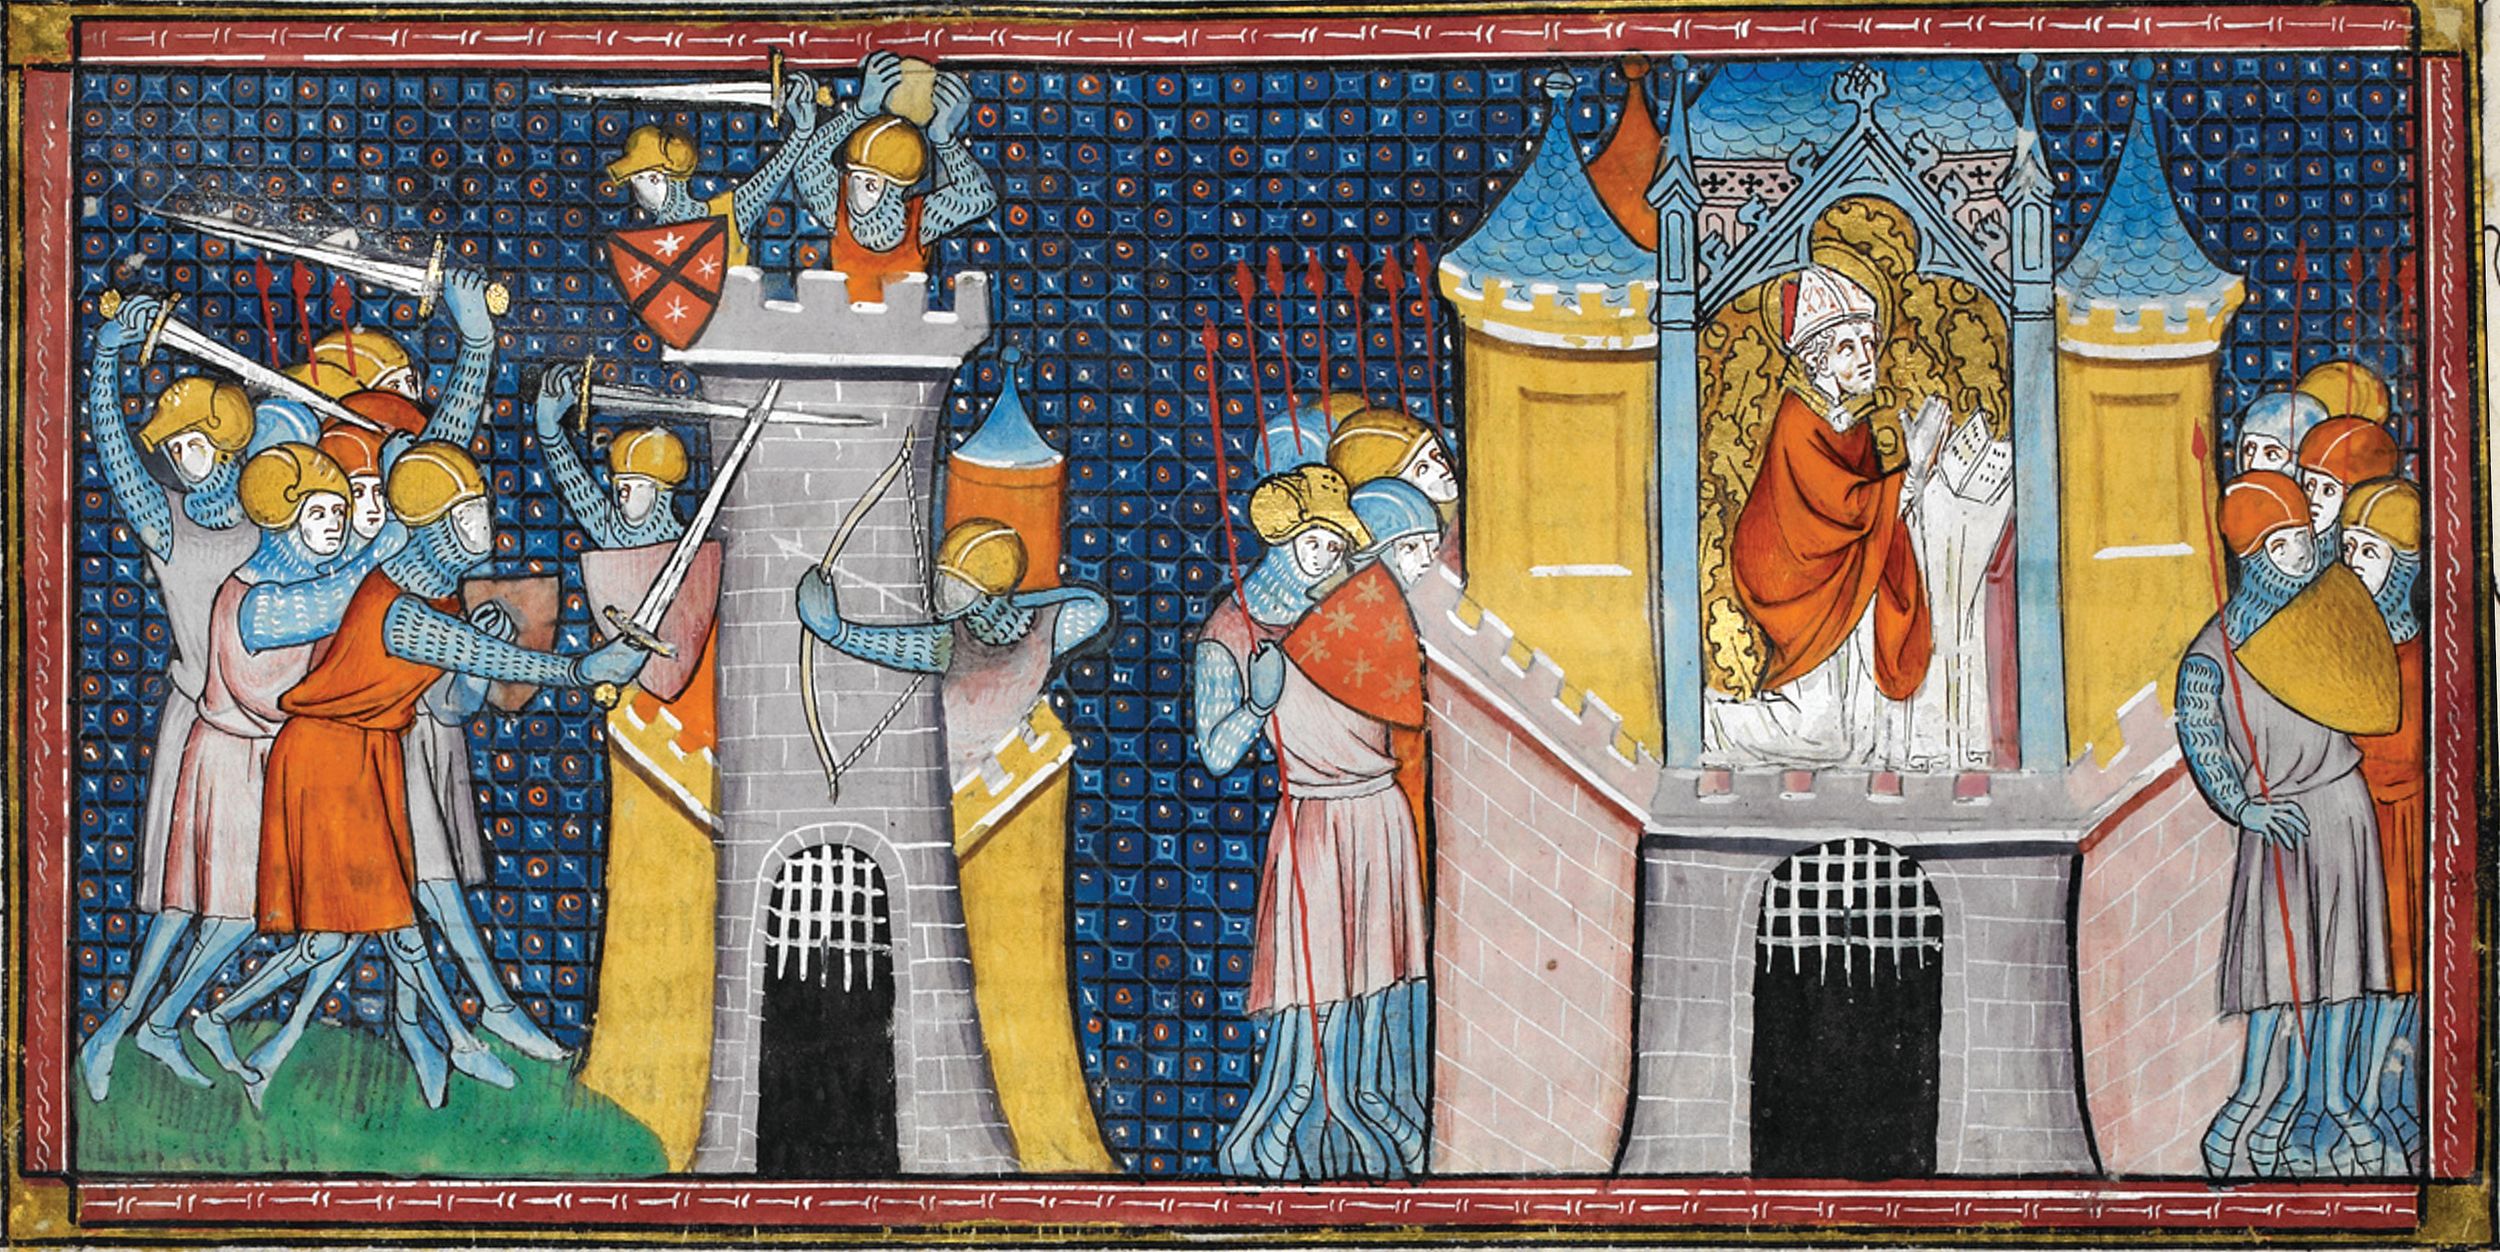 A medieval illustrated manuscript (c. 1350) depicting the siege of Orleans by the Huns while, at right, Anianus, Bishop of Orleans prays for General Flavius Aetius to hasten to the city. Accounts differ on when Aetius and Visigoth King Theodoric I arrived at Orleans, before or after Attila, but though the city surrendered on June 14, the Huns never took possession of it. Attila was pursued and suffered his first and only defeat, at the Battle of the Catalaunian Plains, in one of the last major military operations of the Western Roman Empire.